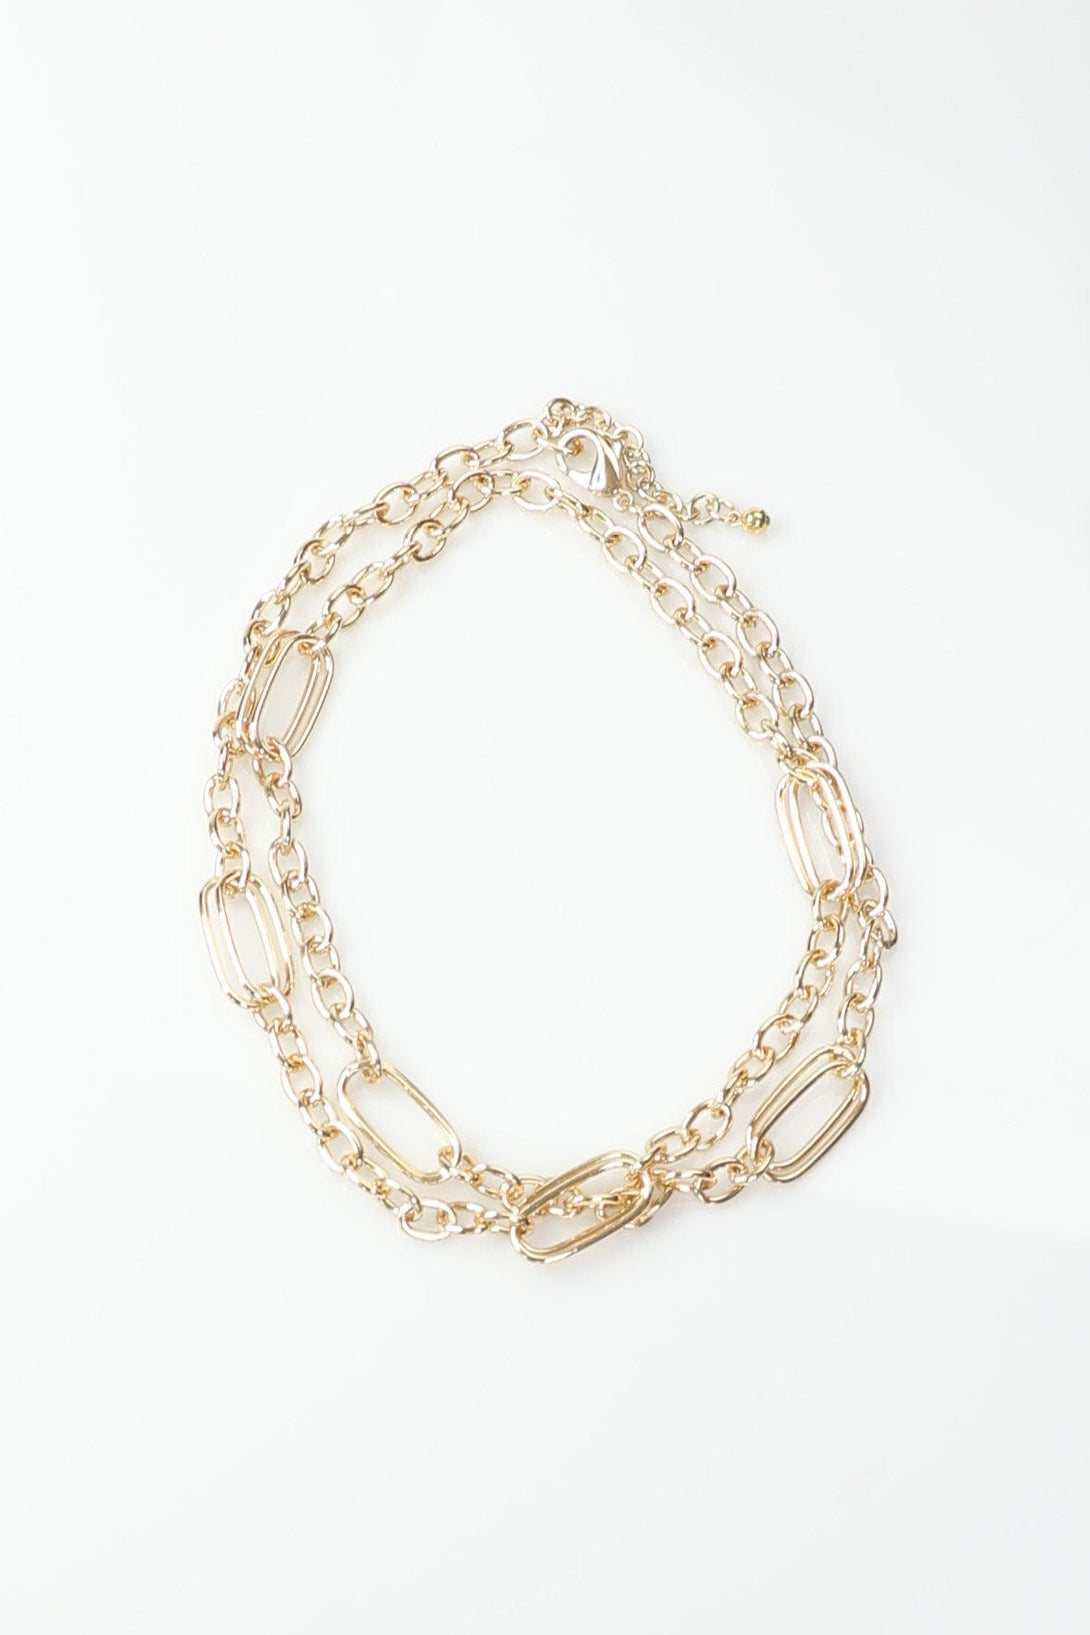 Long Gold Necklace with Paperclip Chain Accent Links